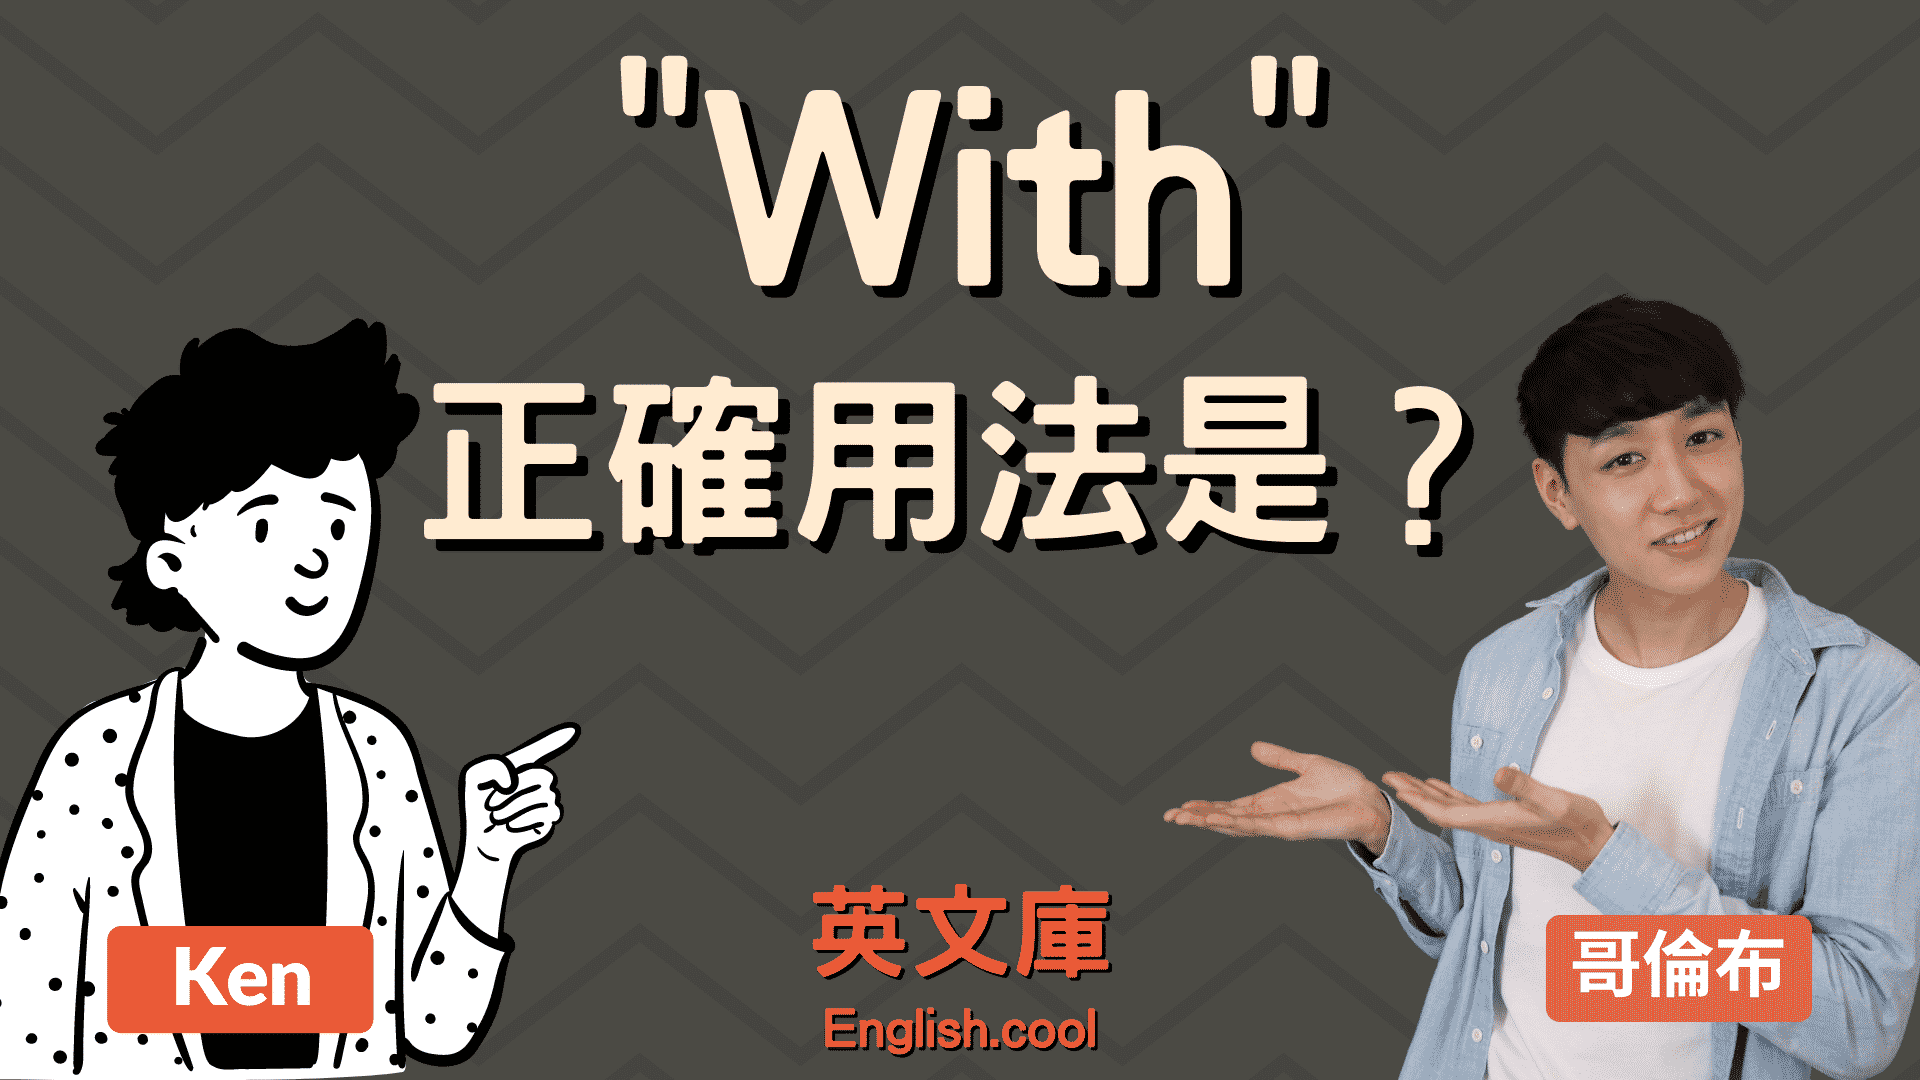 You are currently viewing 「with」正確用法是？來看例句搞懂各種用法！